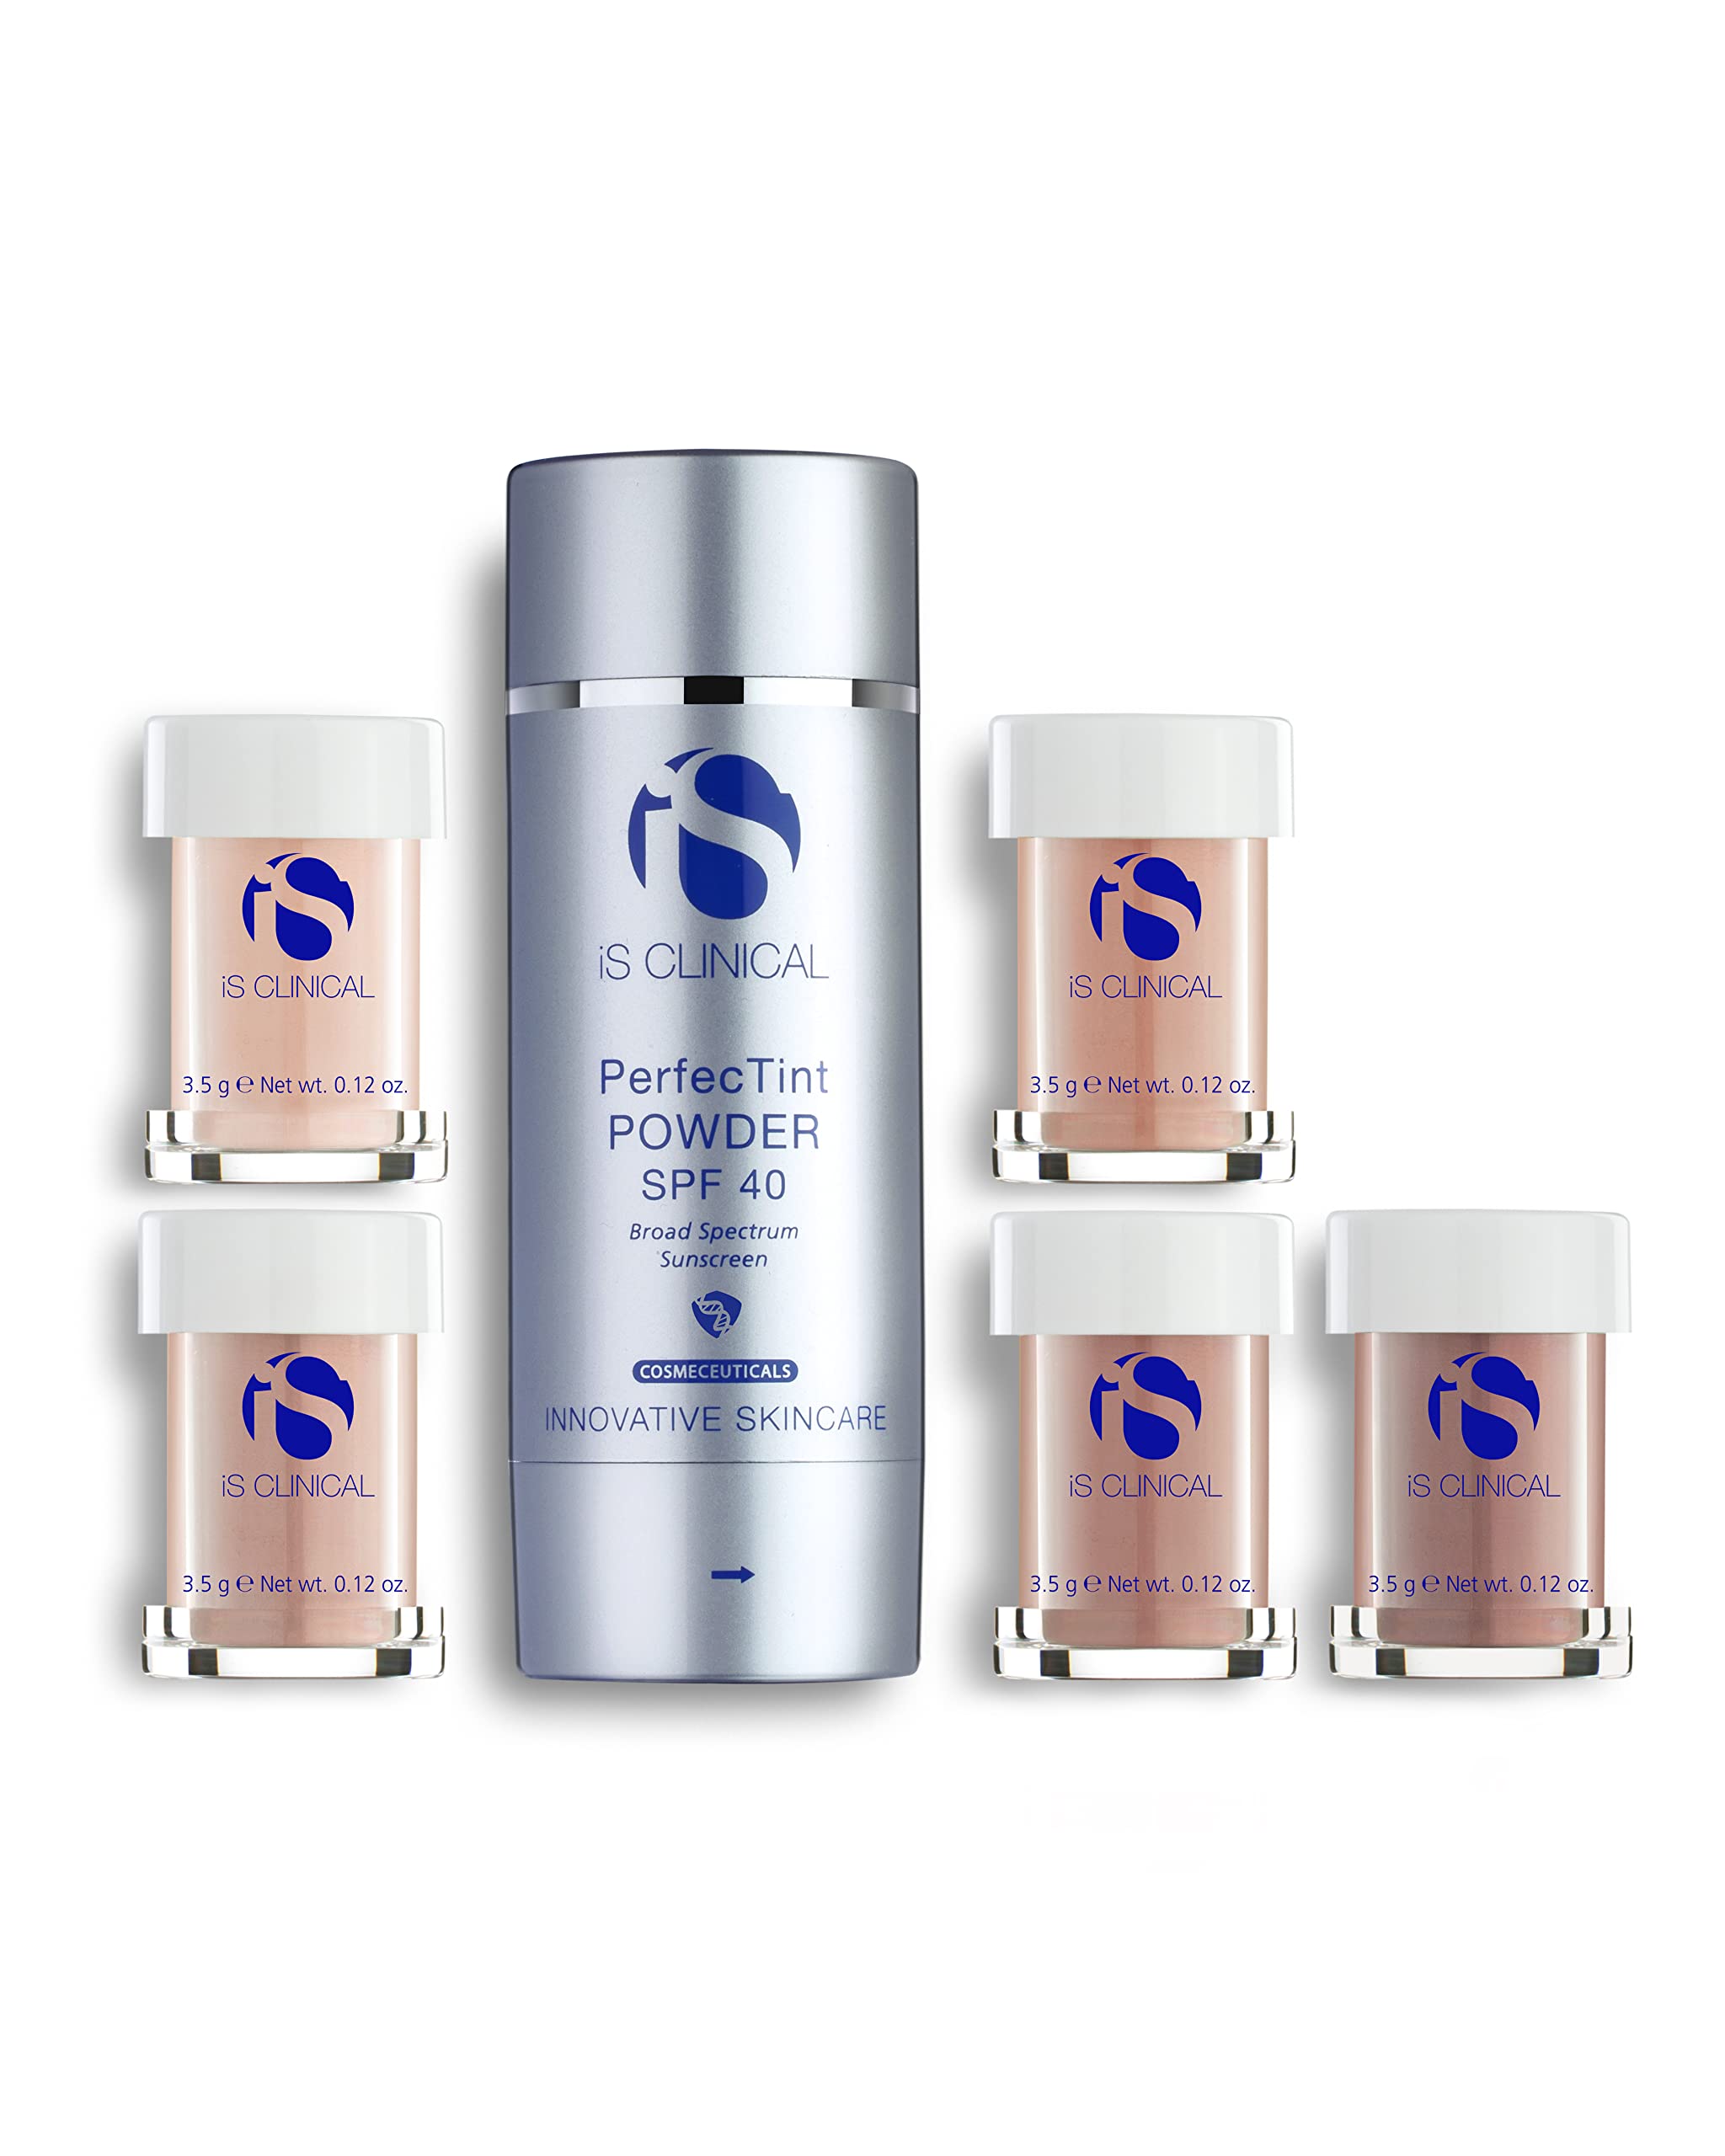 iS CLINICAL PerfecTint Powder SPF 40; Face Powder; Tinted SPF; Loose Face Powder for after makeup application